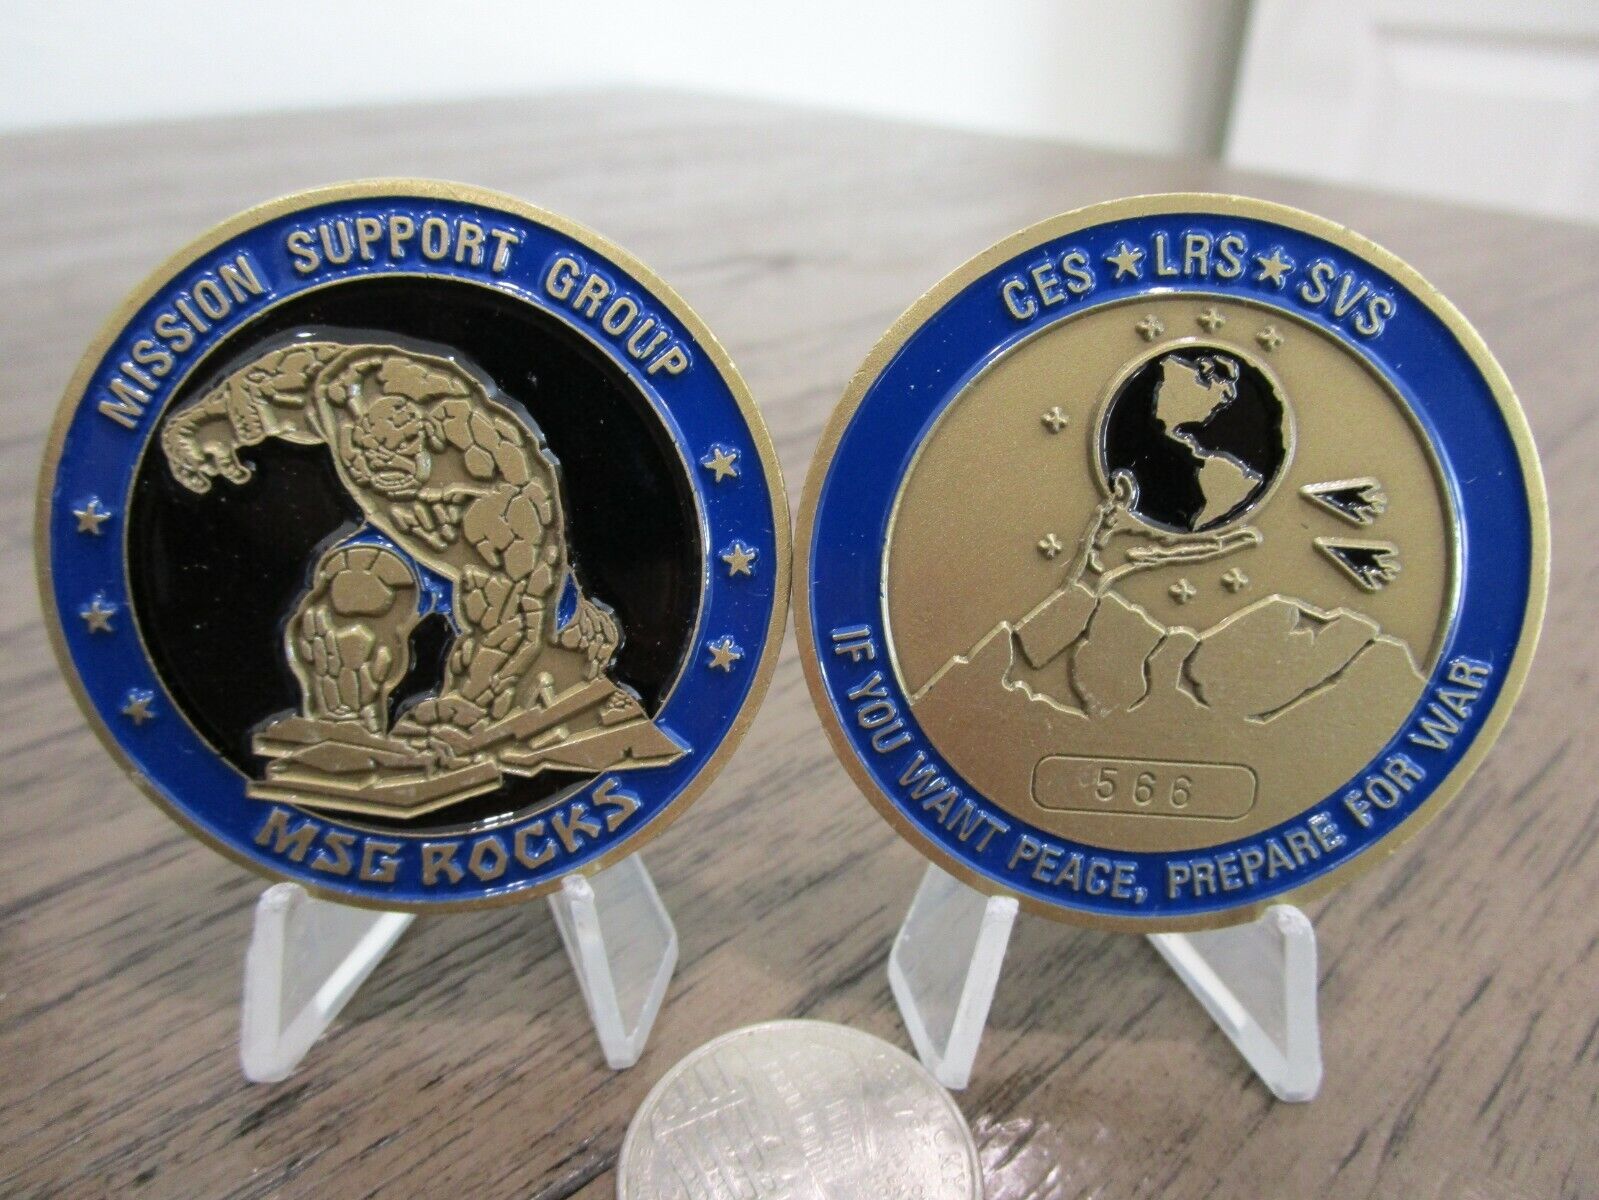 USAF AREA 51 Groom Lake Special Programs Mission Support Group Challenge Coin